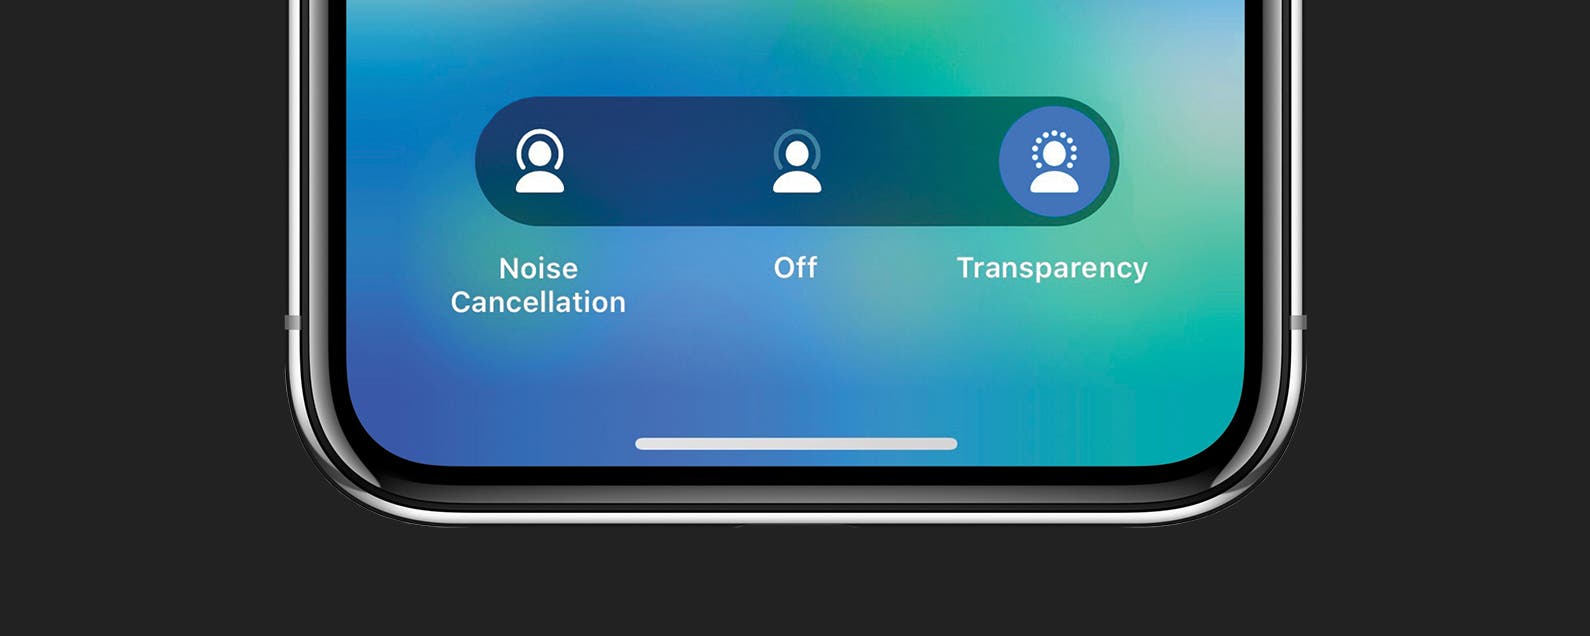 AirPods Pro Controls: How to Use Noise Cancellation Transparency Mode